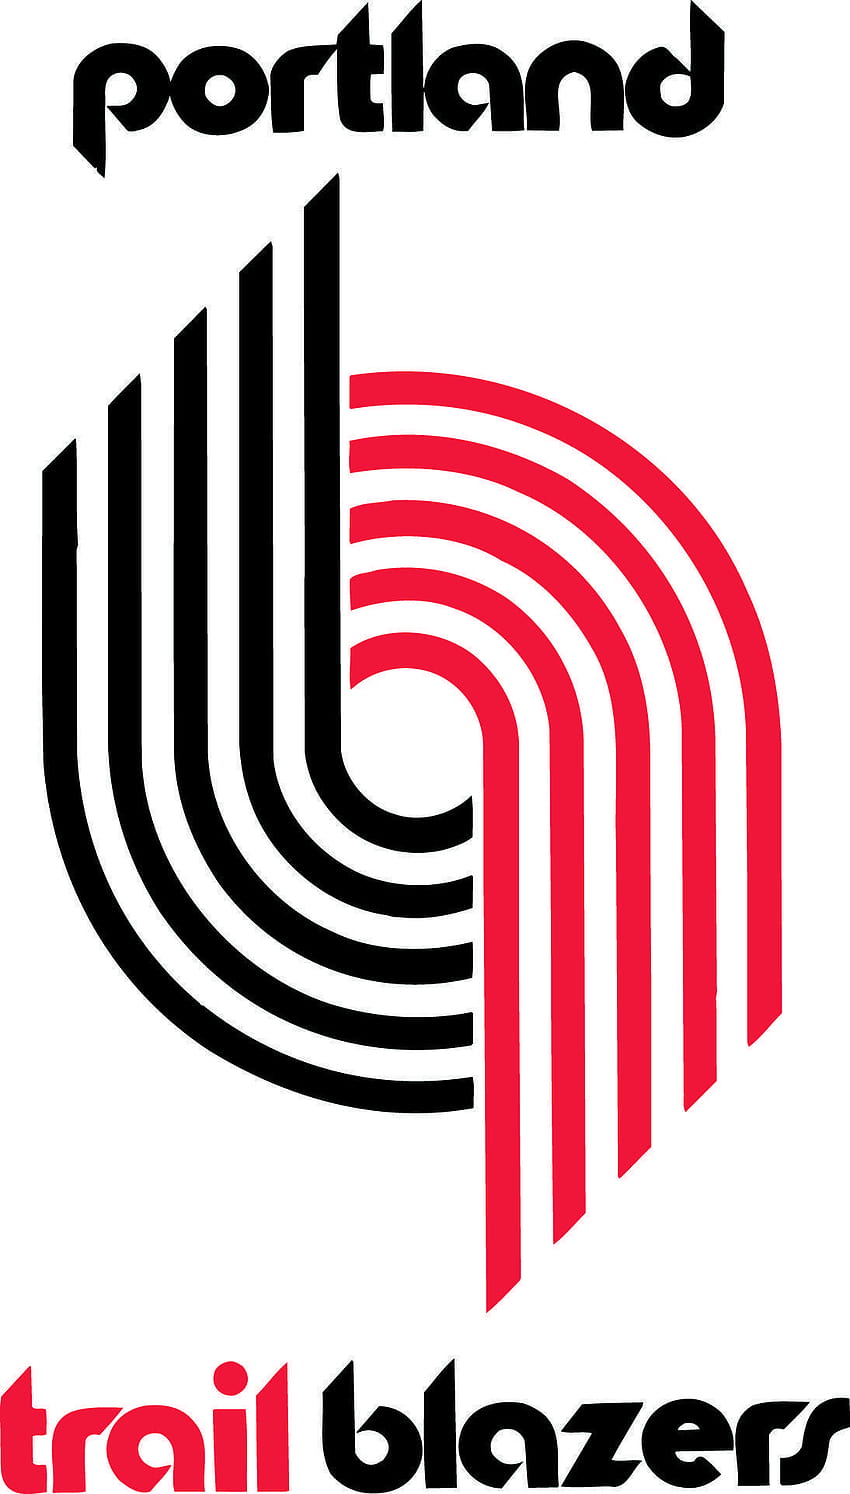 The Portland Trail Blazers, commonly known as the Blazers, are a HD phone wallpaper